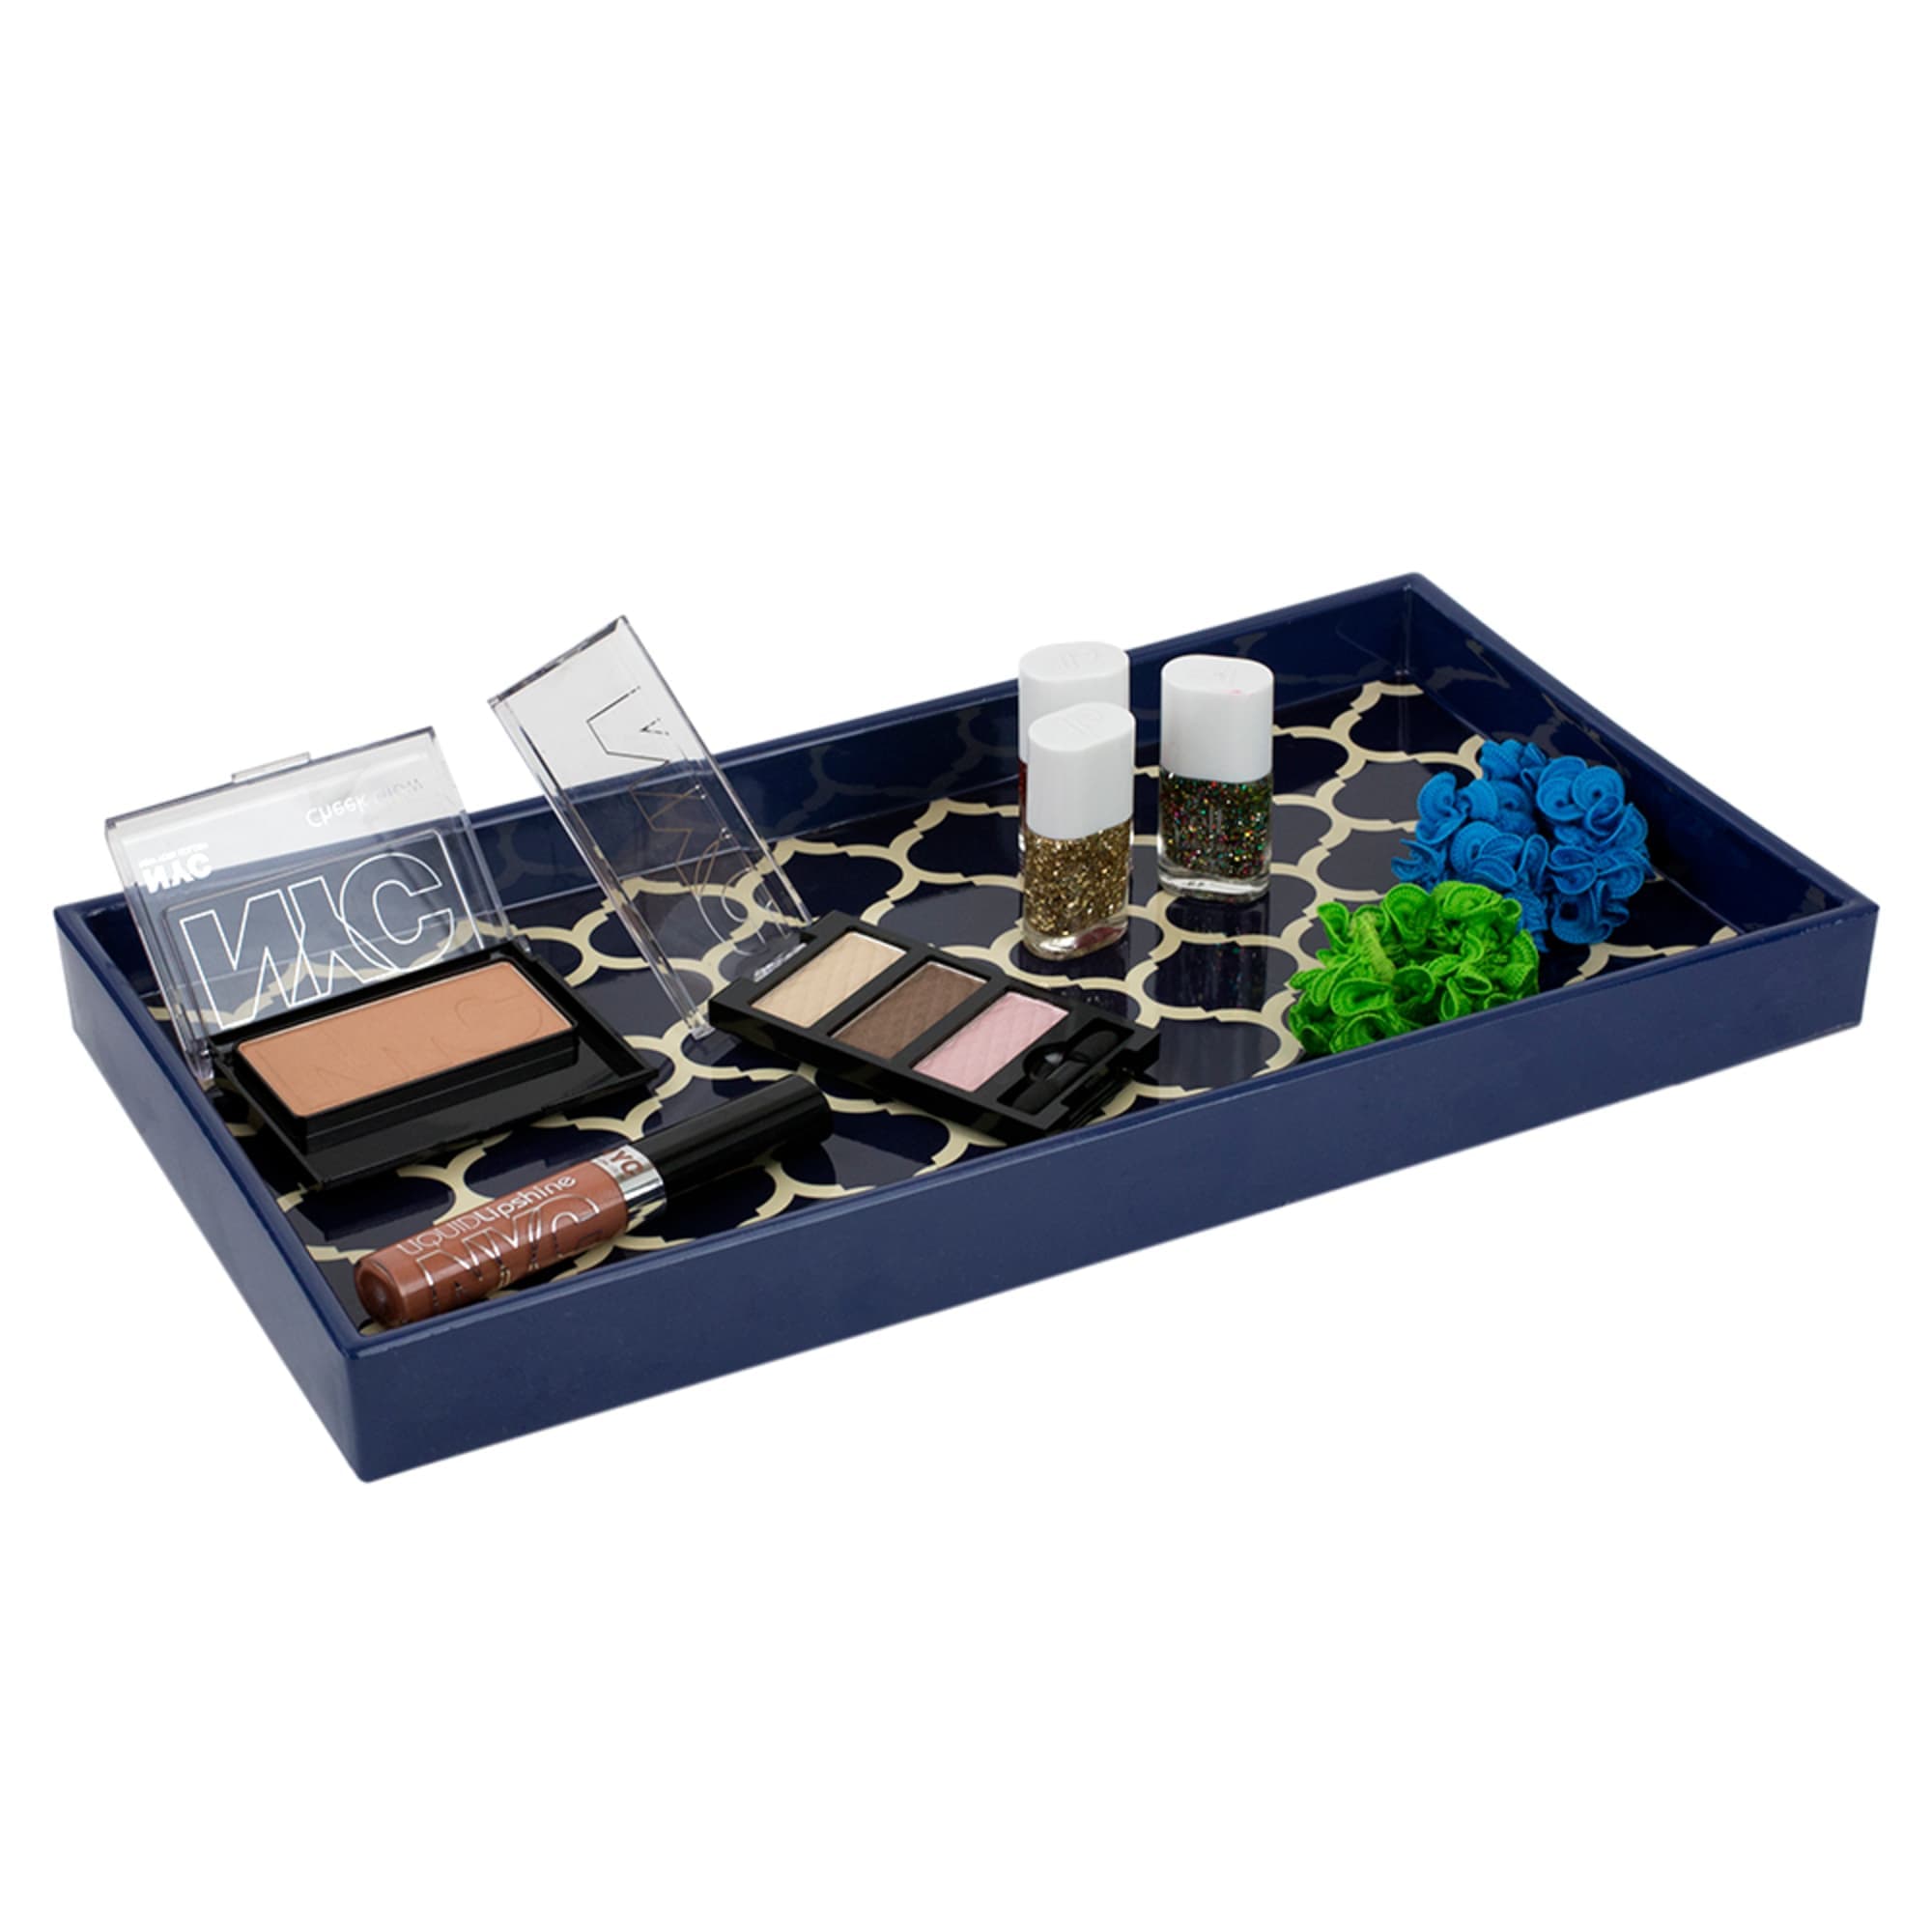 Home Basics Lattice Collection Vanity Tray, Navy $5 EACH, CASE PACK OF 8